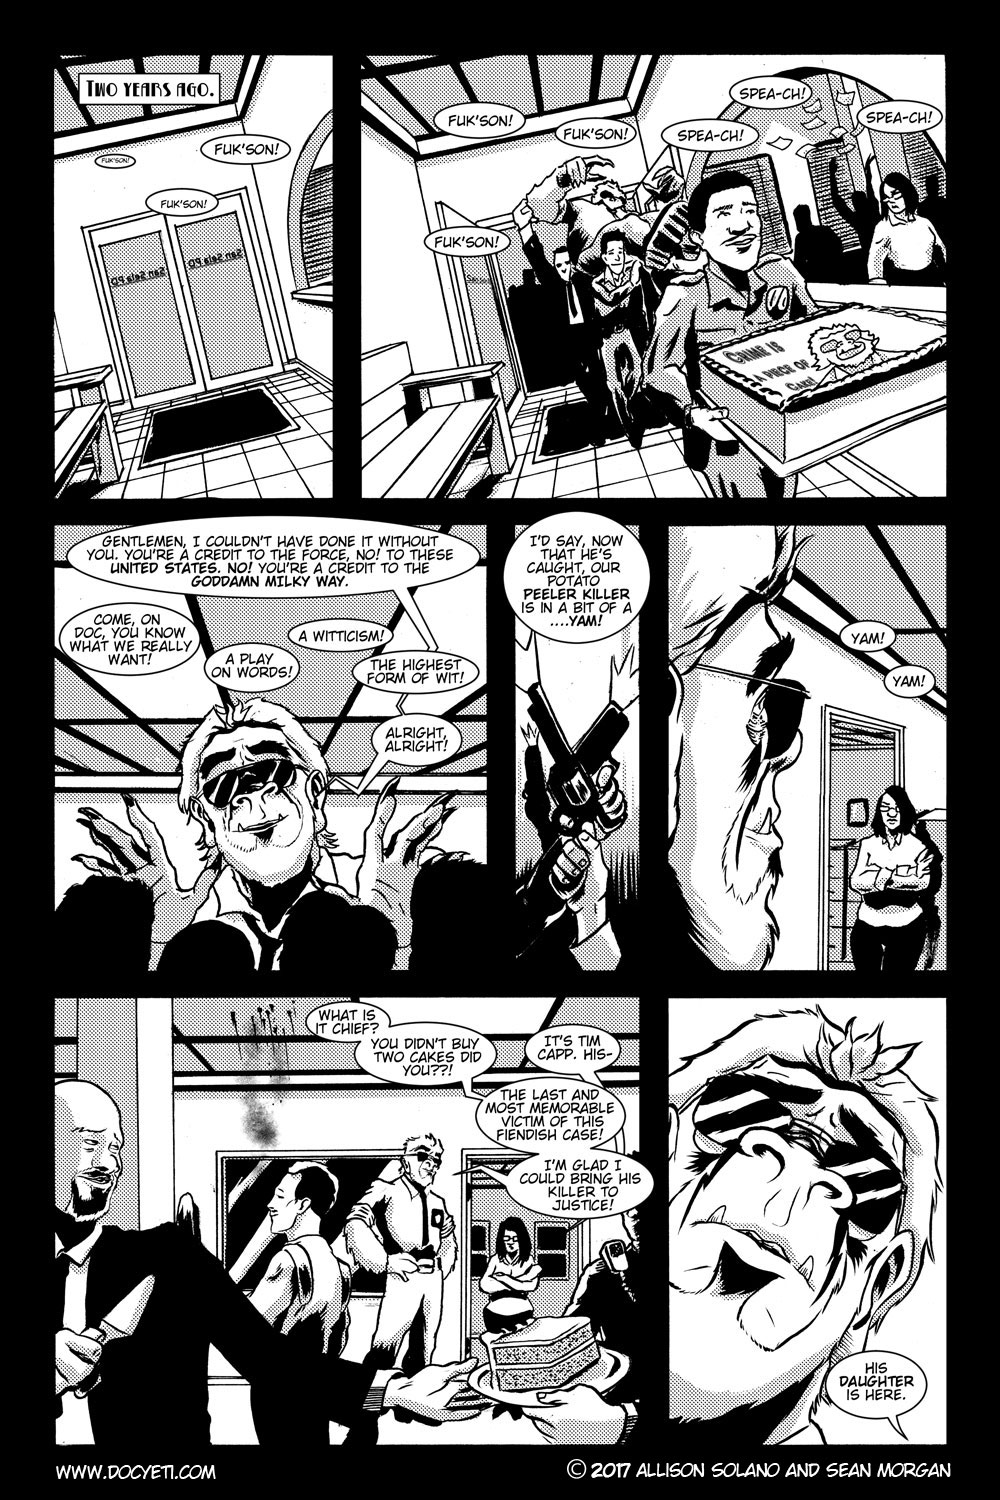 This Yeti for Hire! or the Yeti with the Lace Kerchief! Issue 2 pg.1